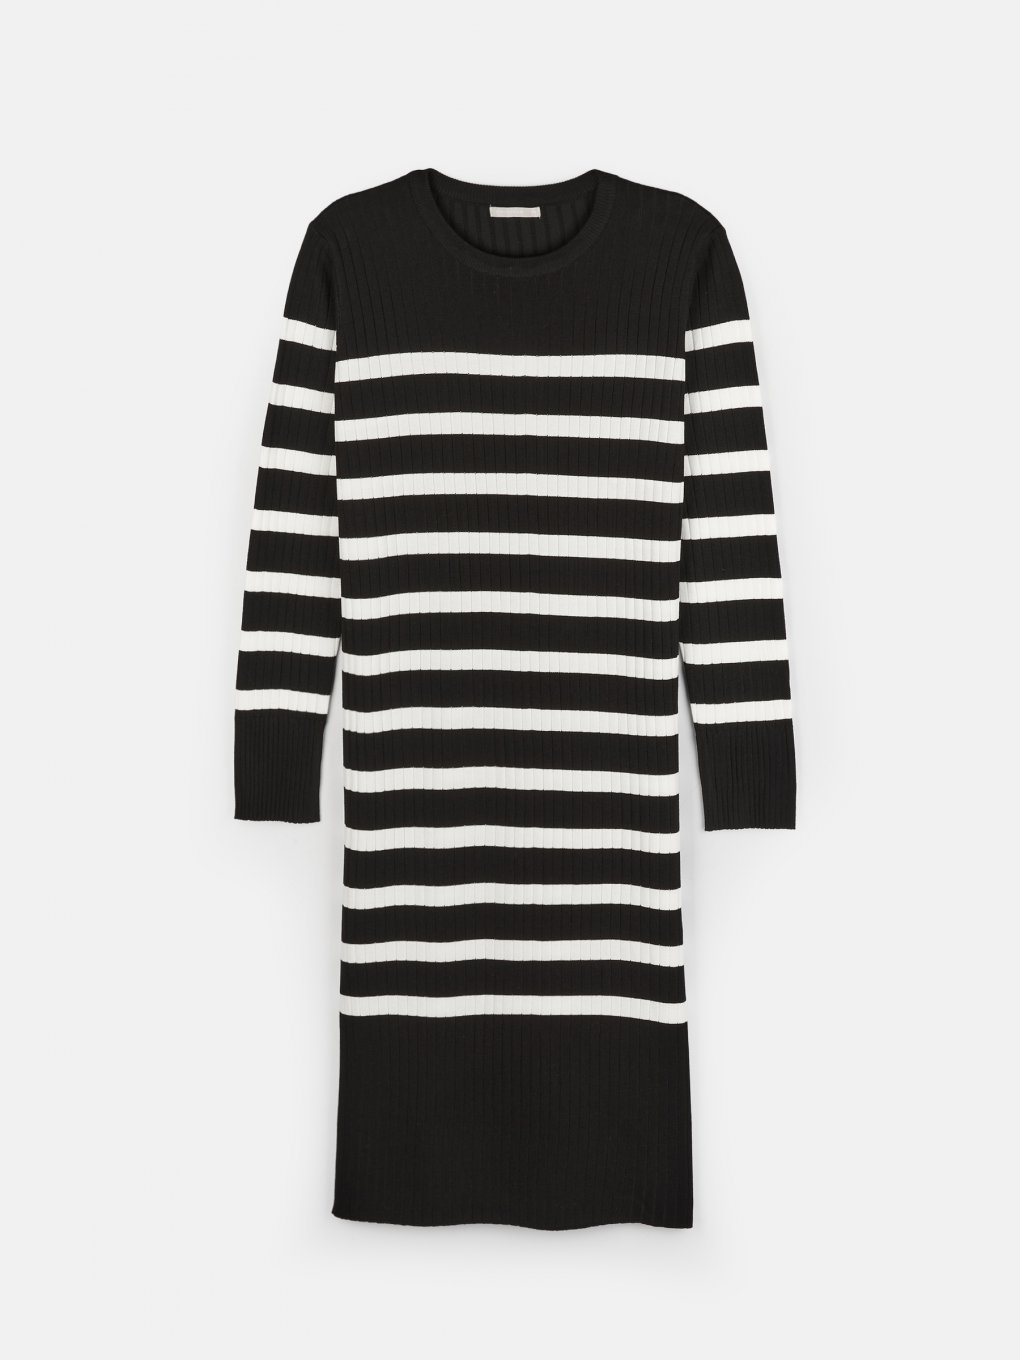 Striped knitted dress